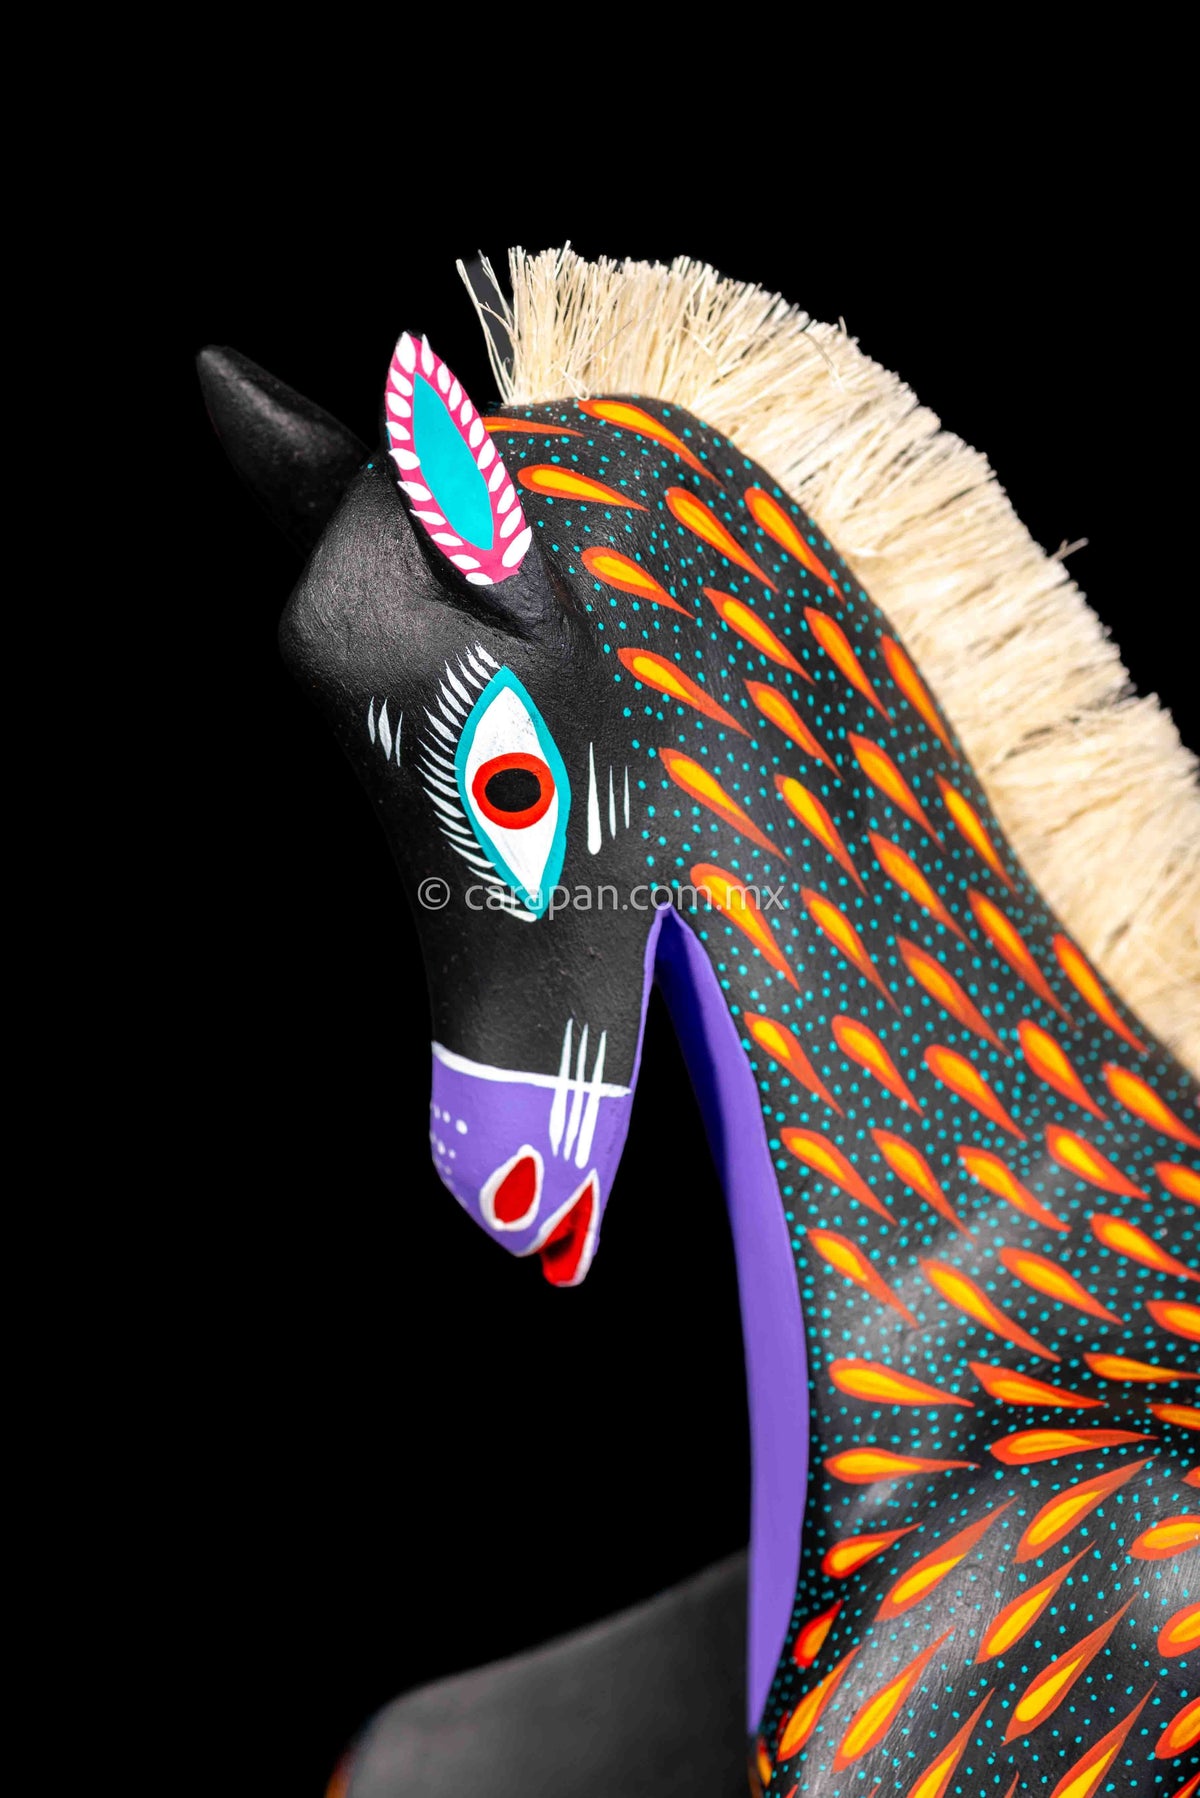 Head of Black Horse Mexican Wood Carving Alebrije hand painted in red with orange strokes